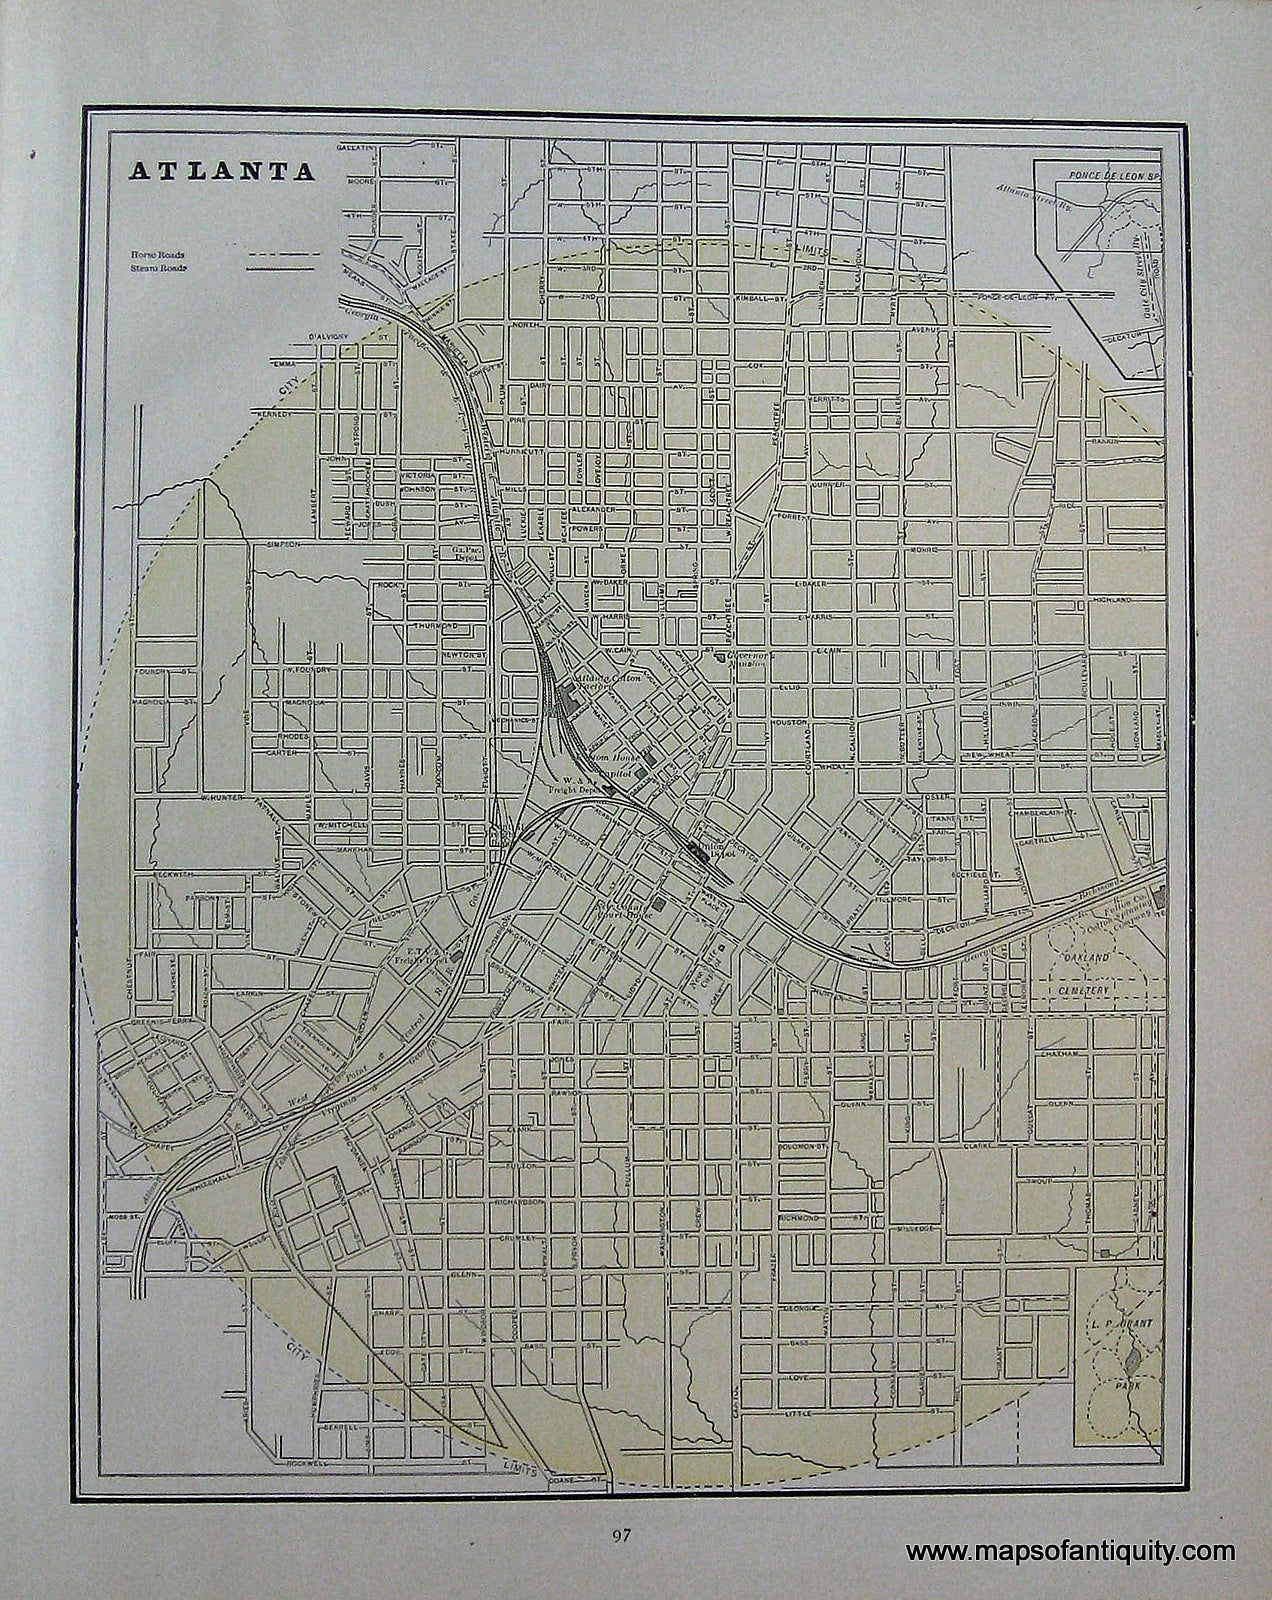 Antique-City-Plan-Atlanta**********-Towns-and-Cities-South-1891-Goldthwaite-Maps-Of-Antiquity